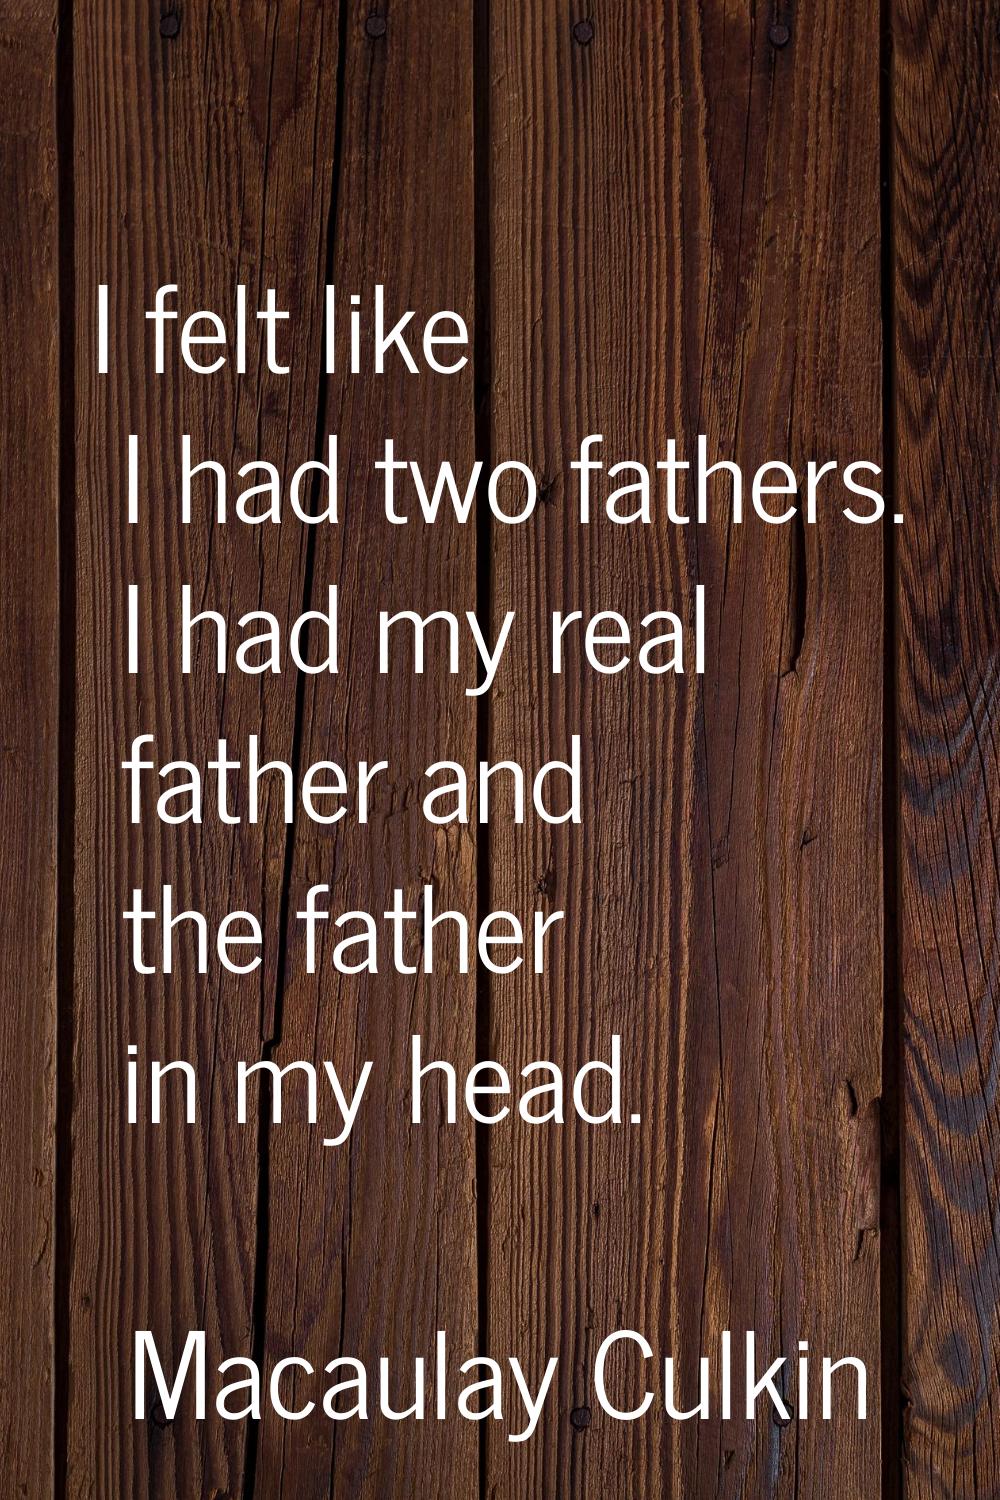 I felt like I had two fathers. I had my real father and the father in my head.